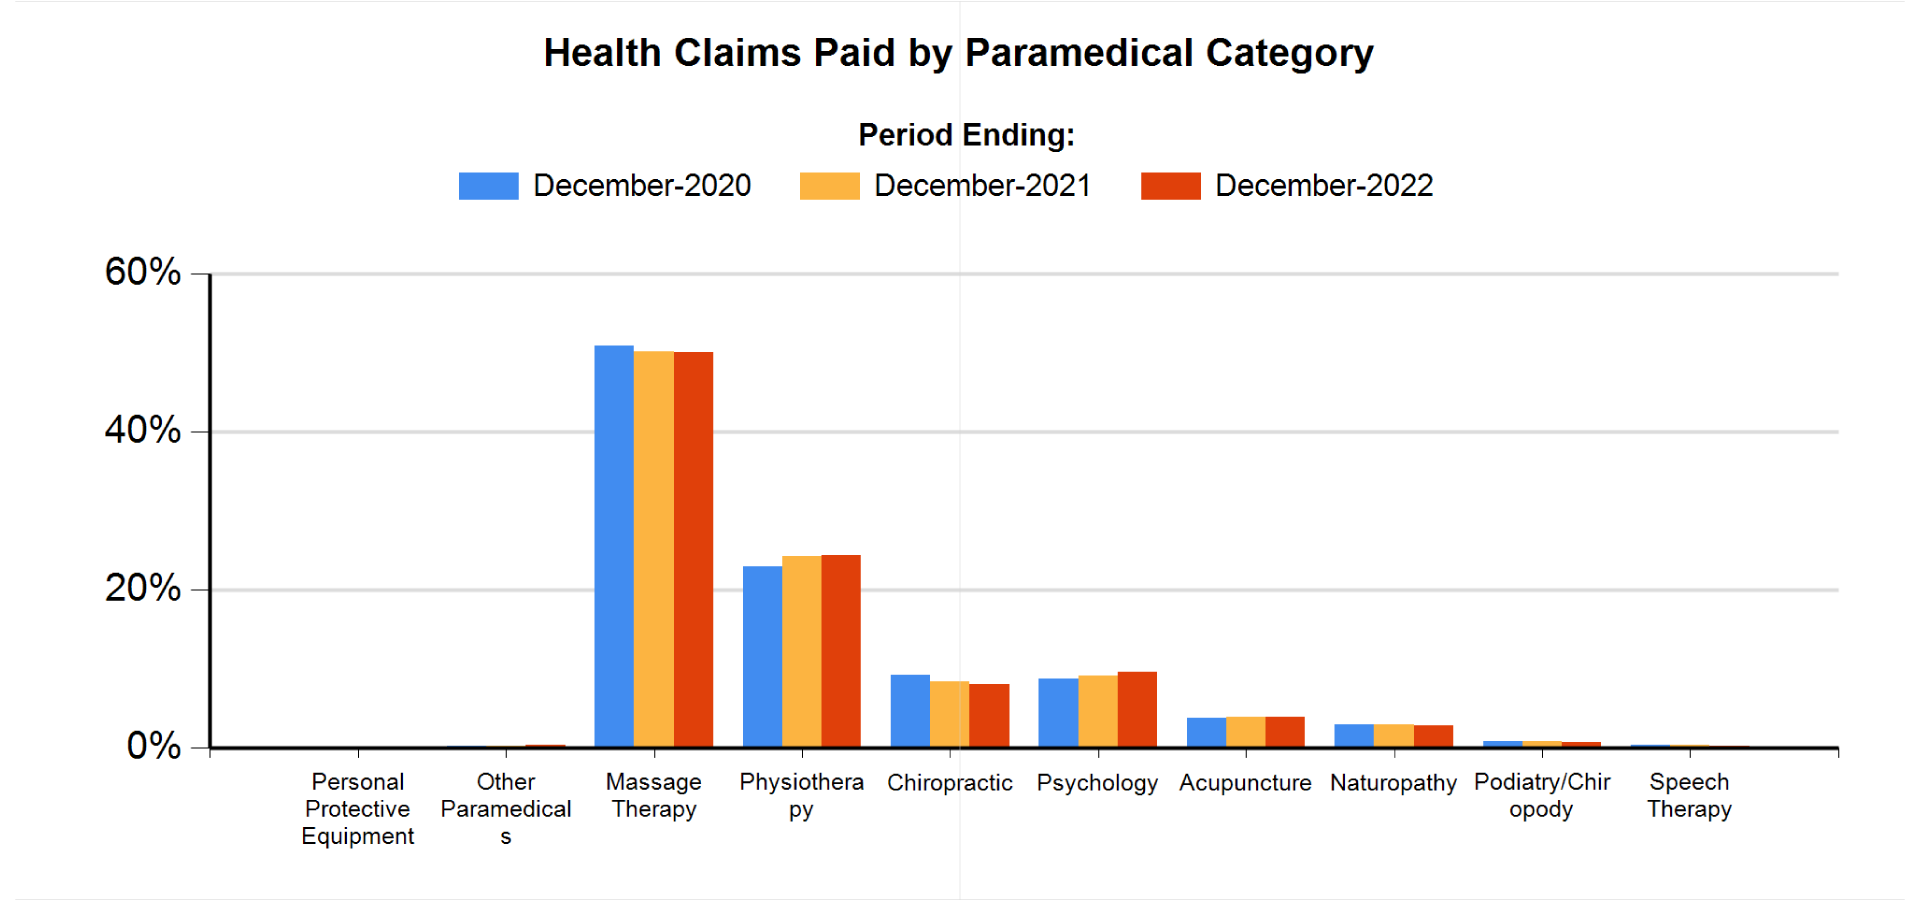 Health Claims Paid By Paramedical Category